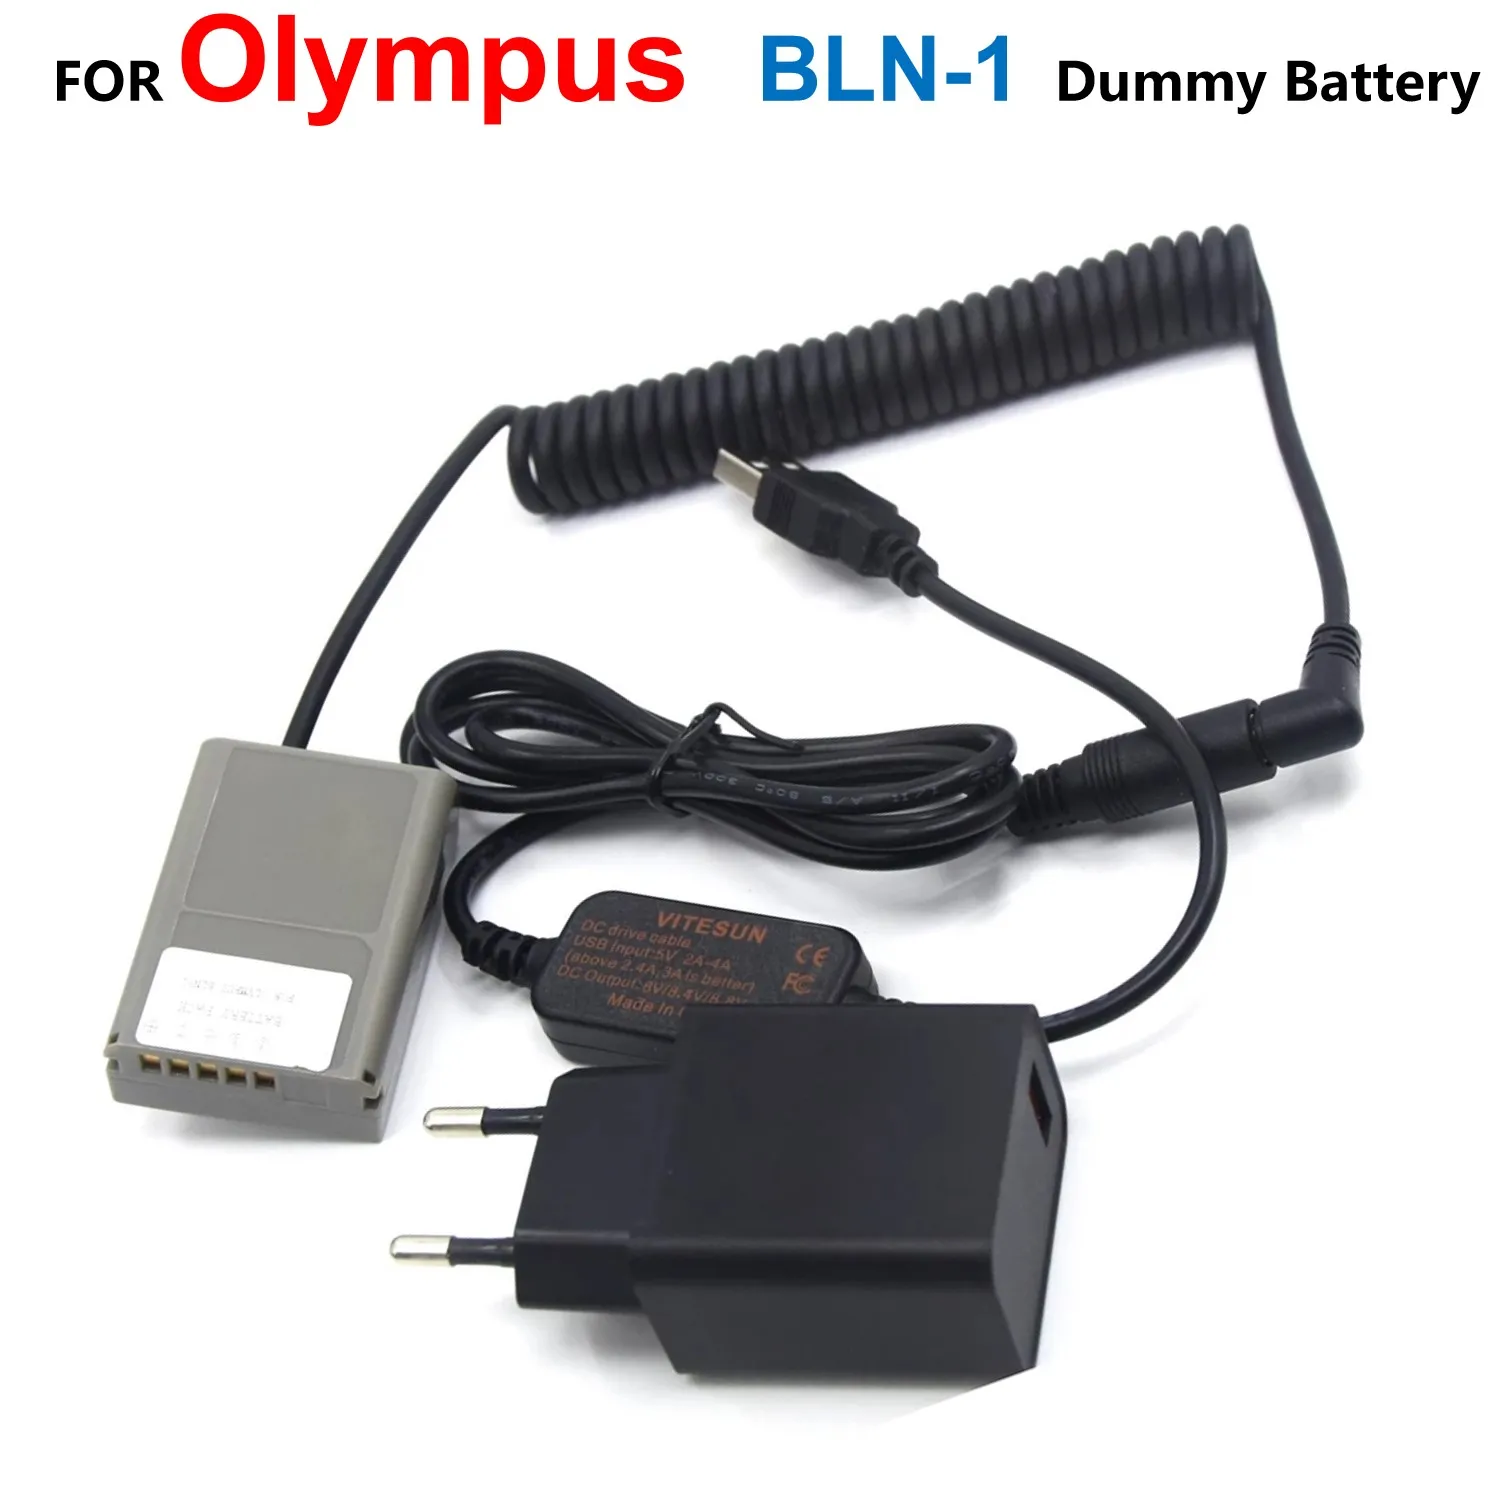 

BLN-1 Dummy Battery PS-BLN1 Spring DC Coupler+Power Bank USB Cable+QC3.0 Adapter For Olympus Camera OM-D E-M5 II 2 E-M1 PEN E-P5